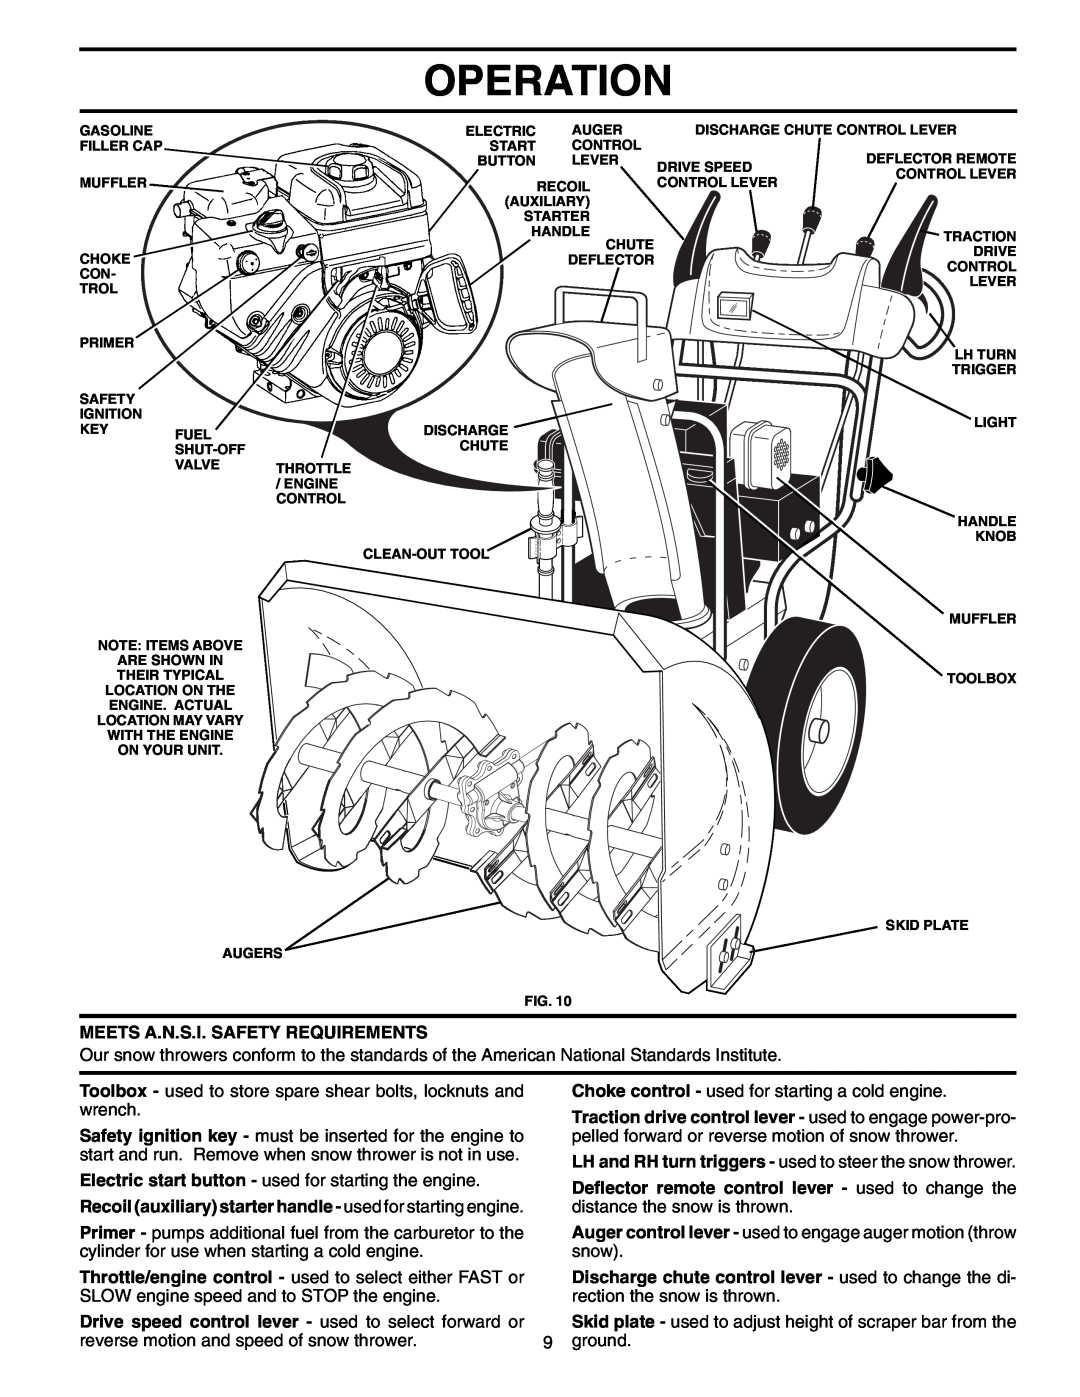 Husqvarna 9527SBEB owner manual Operation, Meets A.N.S.I. Safety Requirements 